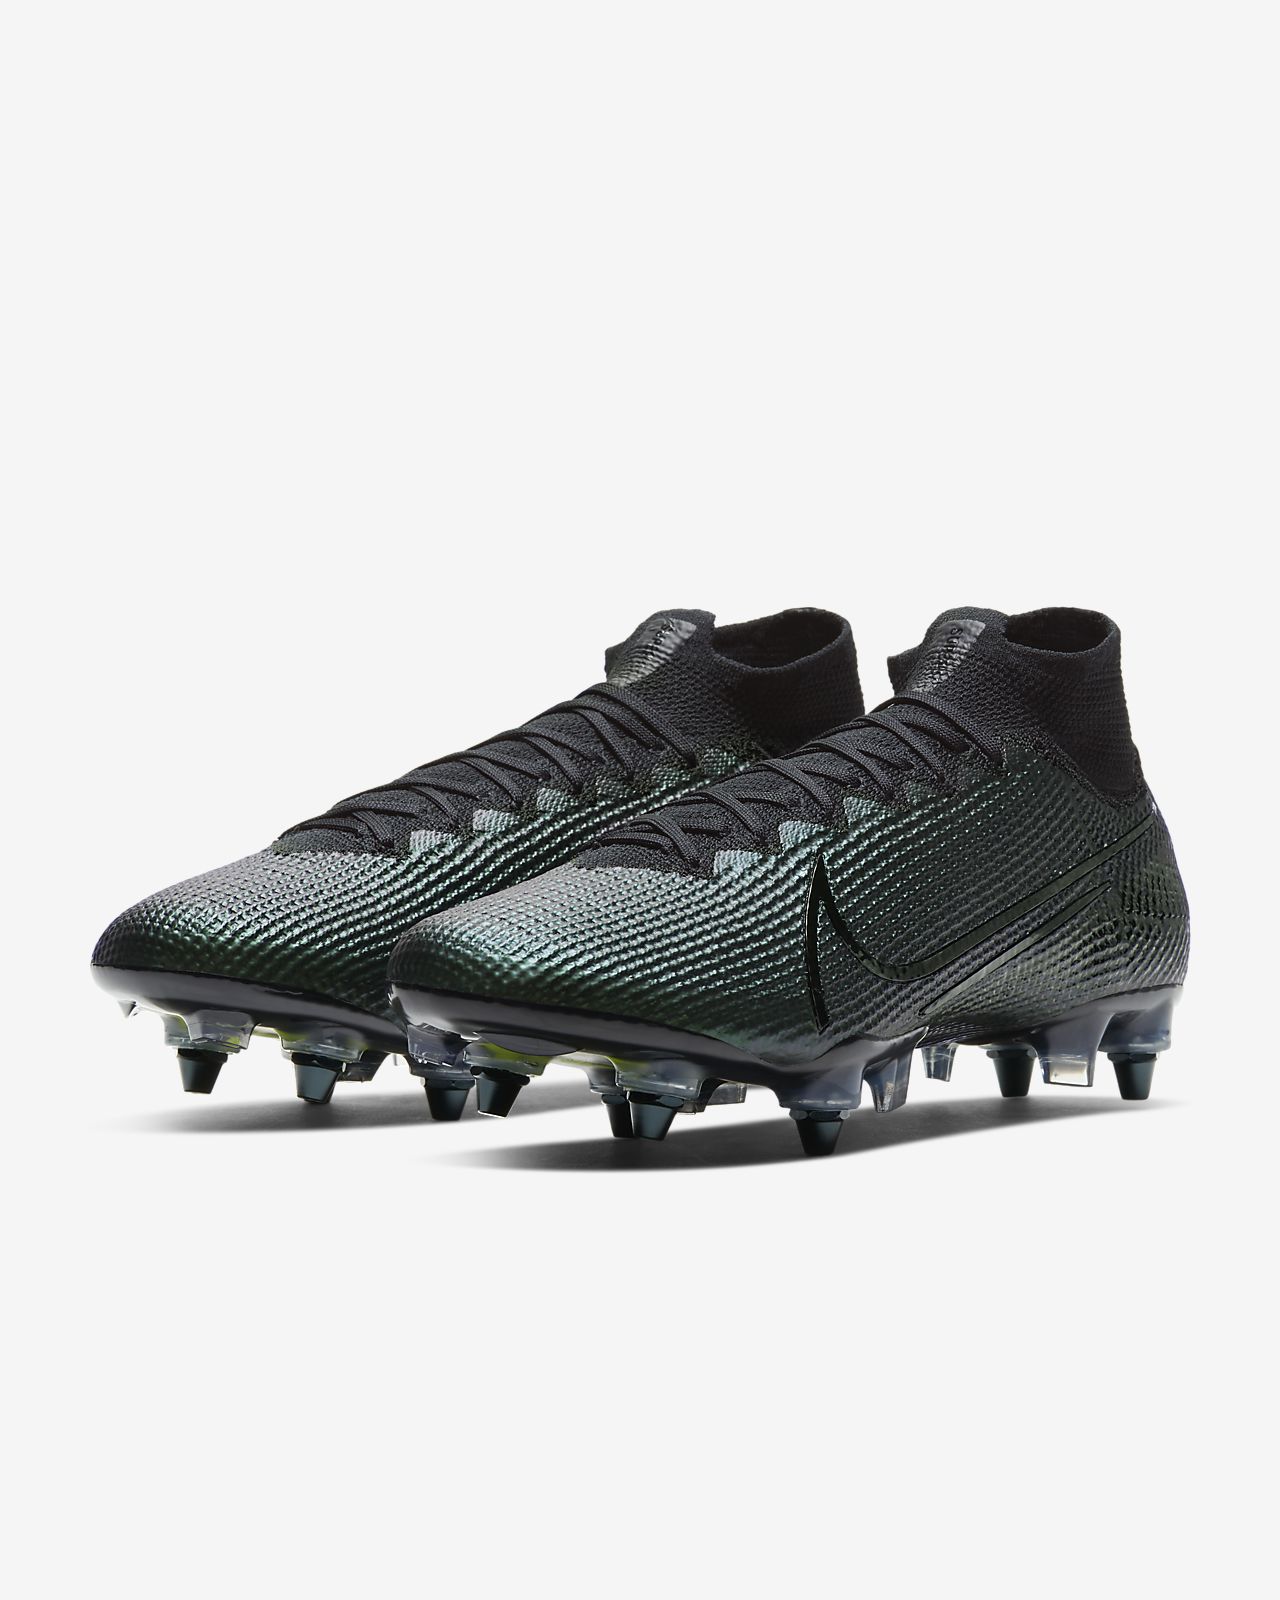 Nike Mercurial Superfly 6 Academy Indoor Soccer Shoes.